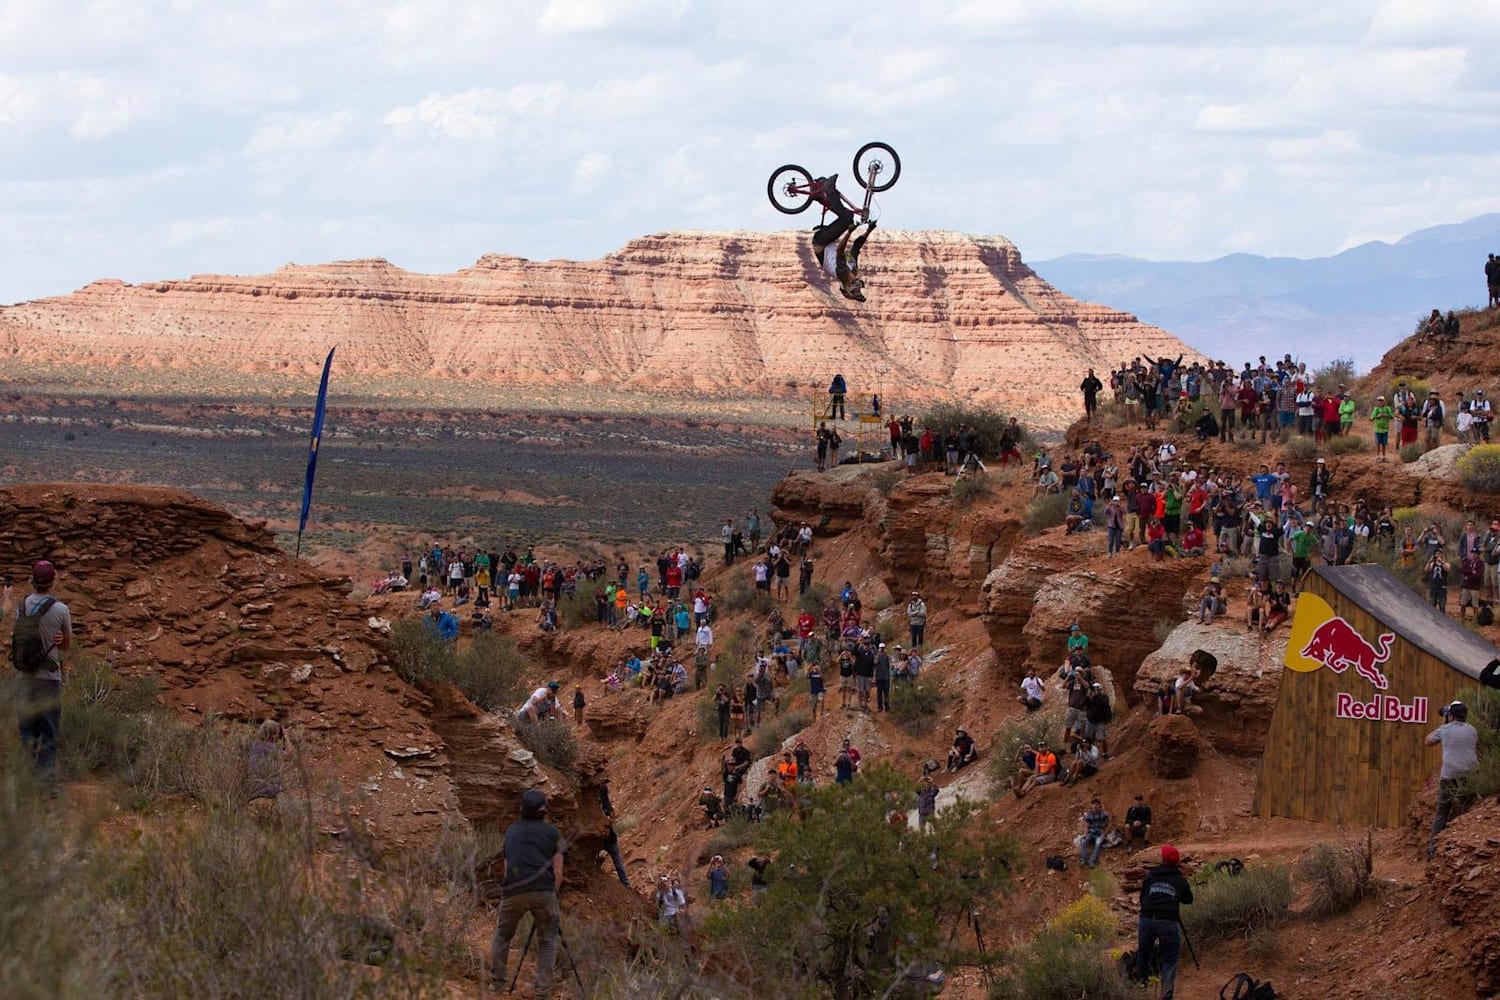 Red Bull Rampage: The wildest airs in 